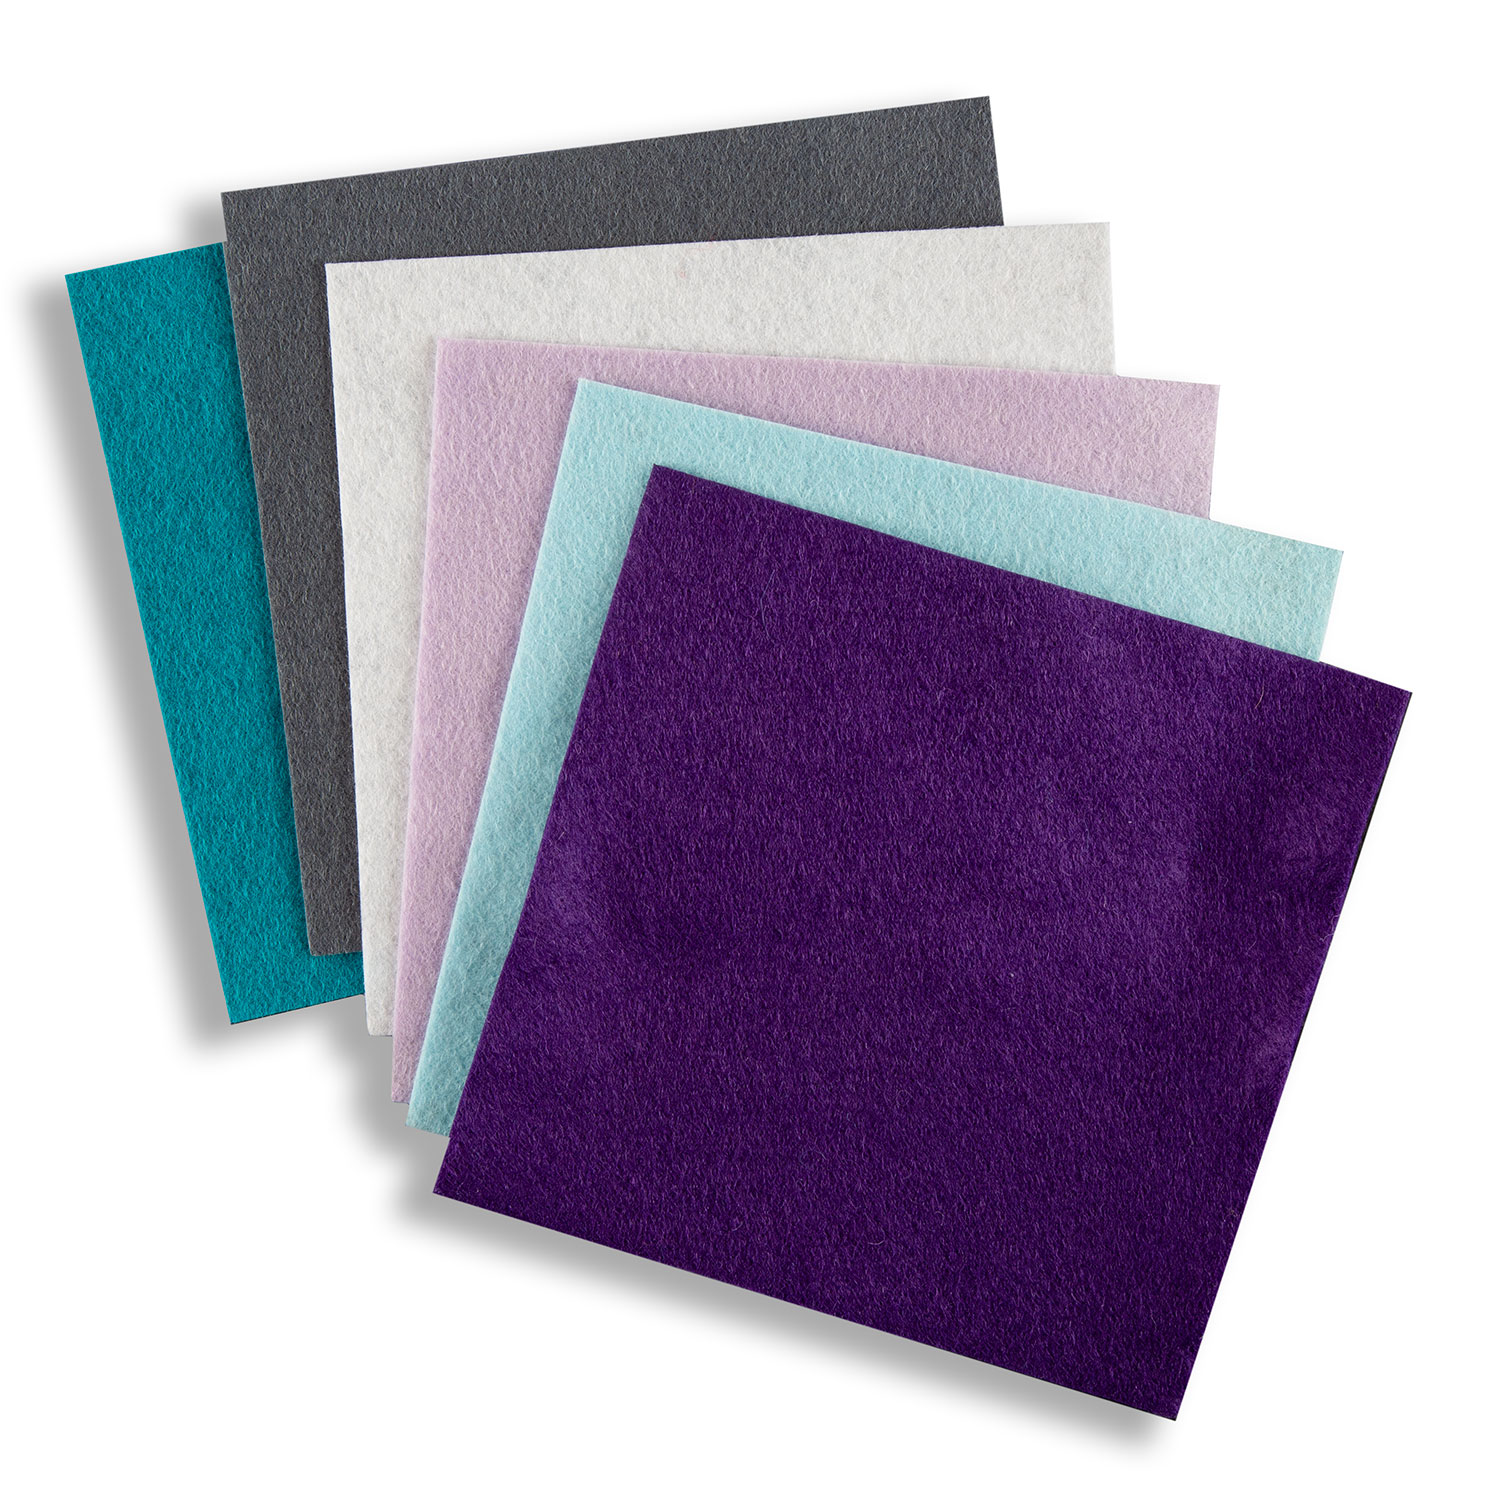 Felt by Clarity Pack of 6 Non-Adhesive Mixed Colour Felt 6x6" Squares Pick N Mix - Pick Any 2 - Funky Star